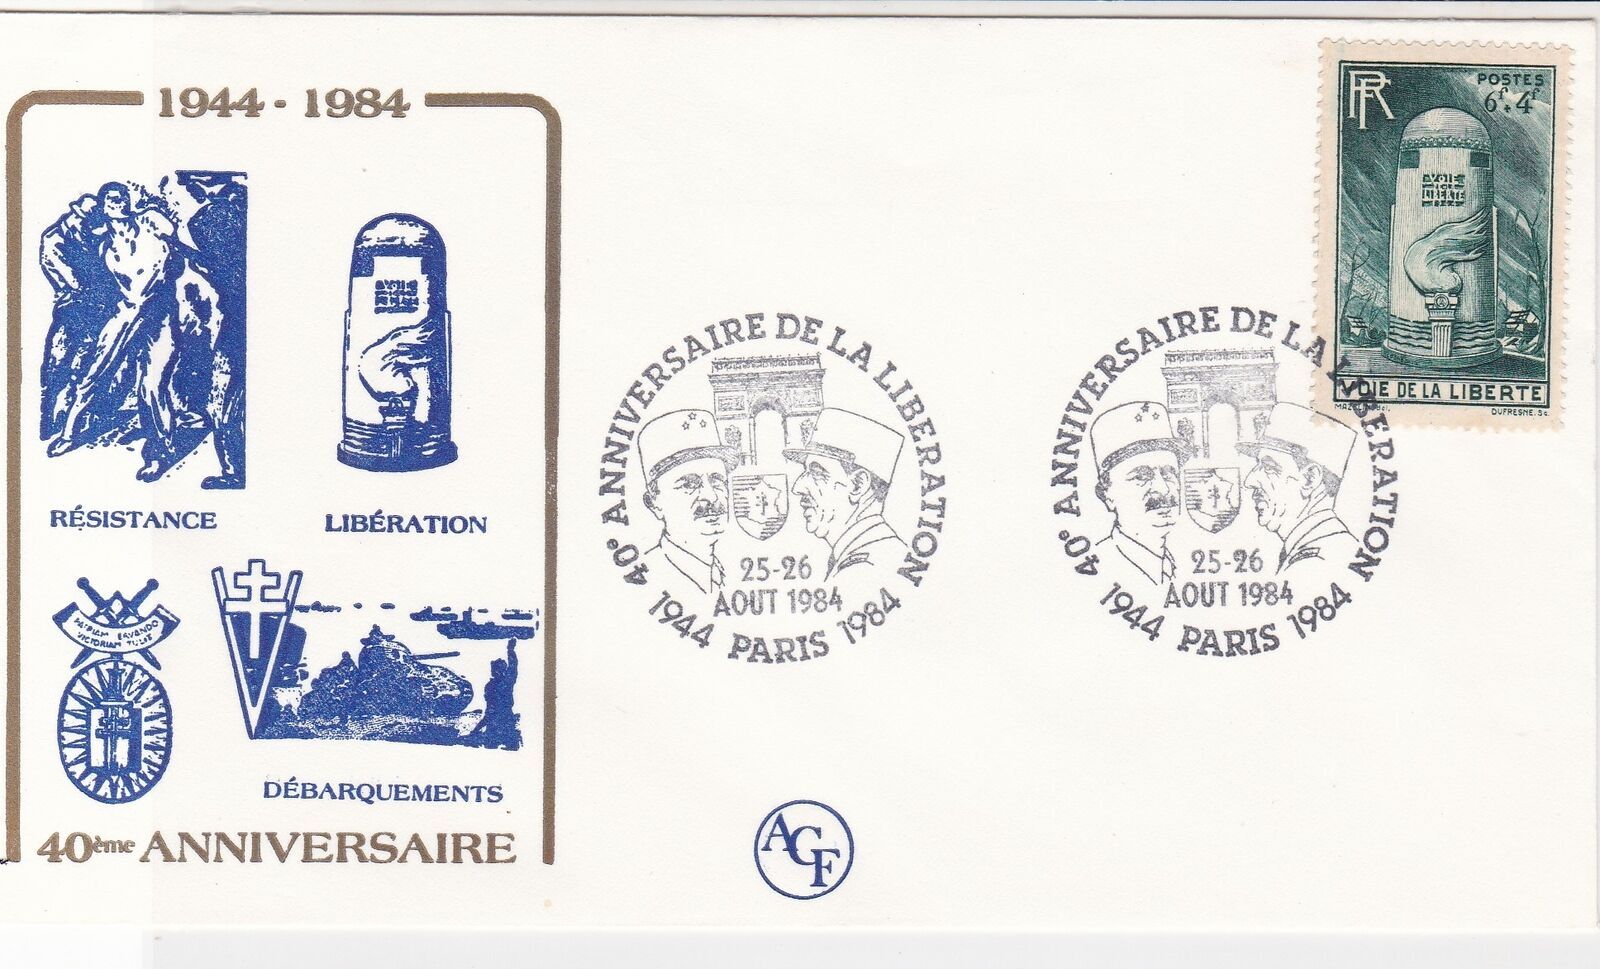 France Ww2 40th Anniv War Icons Aout Paris Slogan Cancel Stamps Cover R Europe France Colonies Stamp Hipstamp